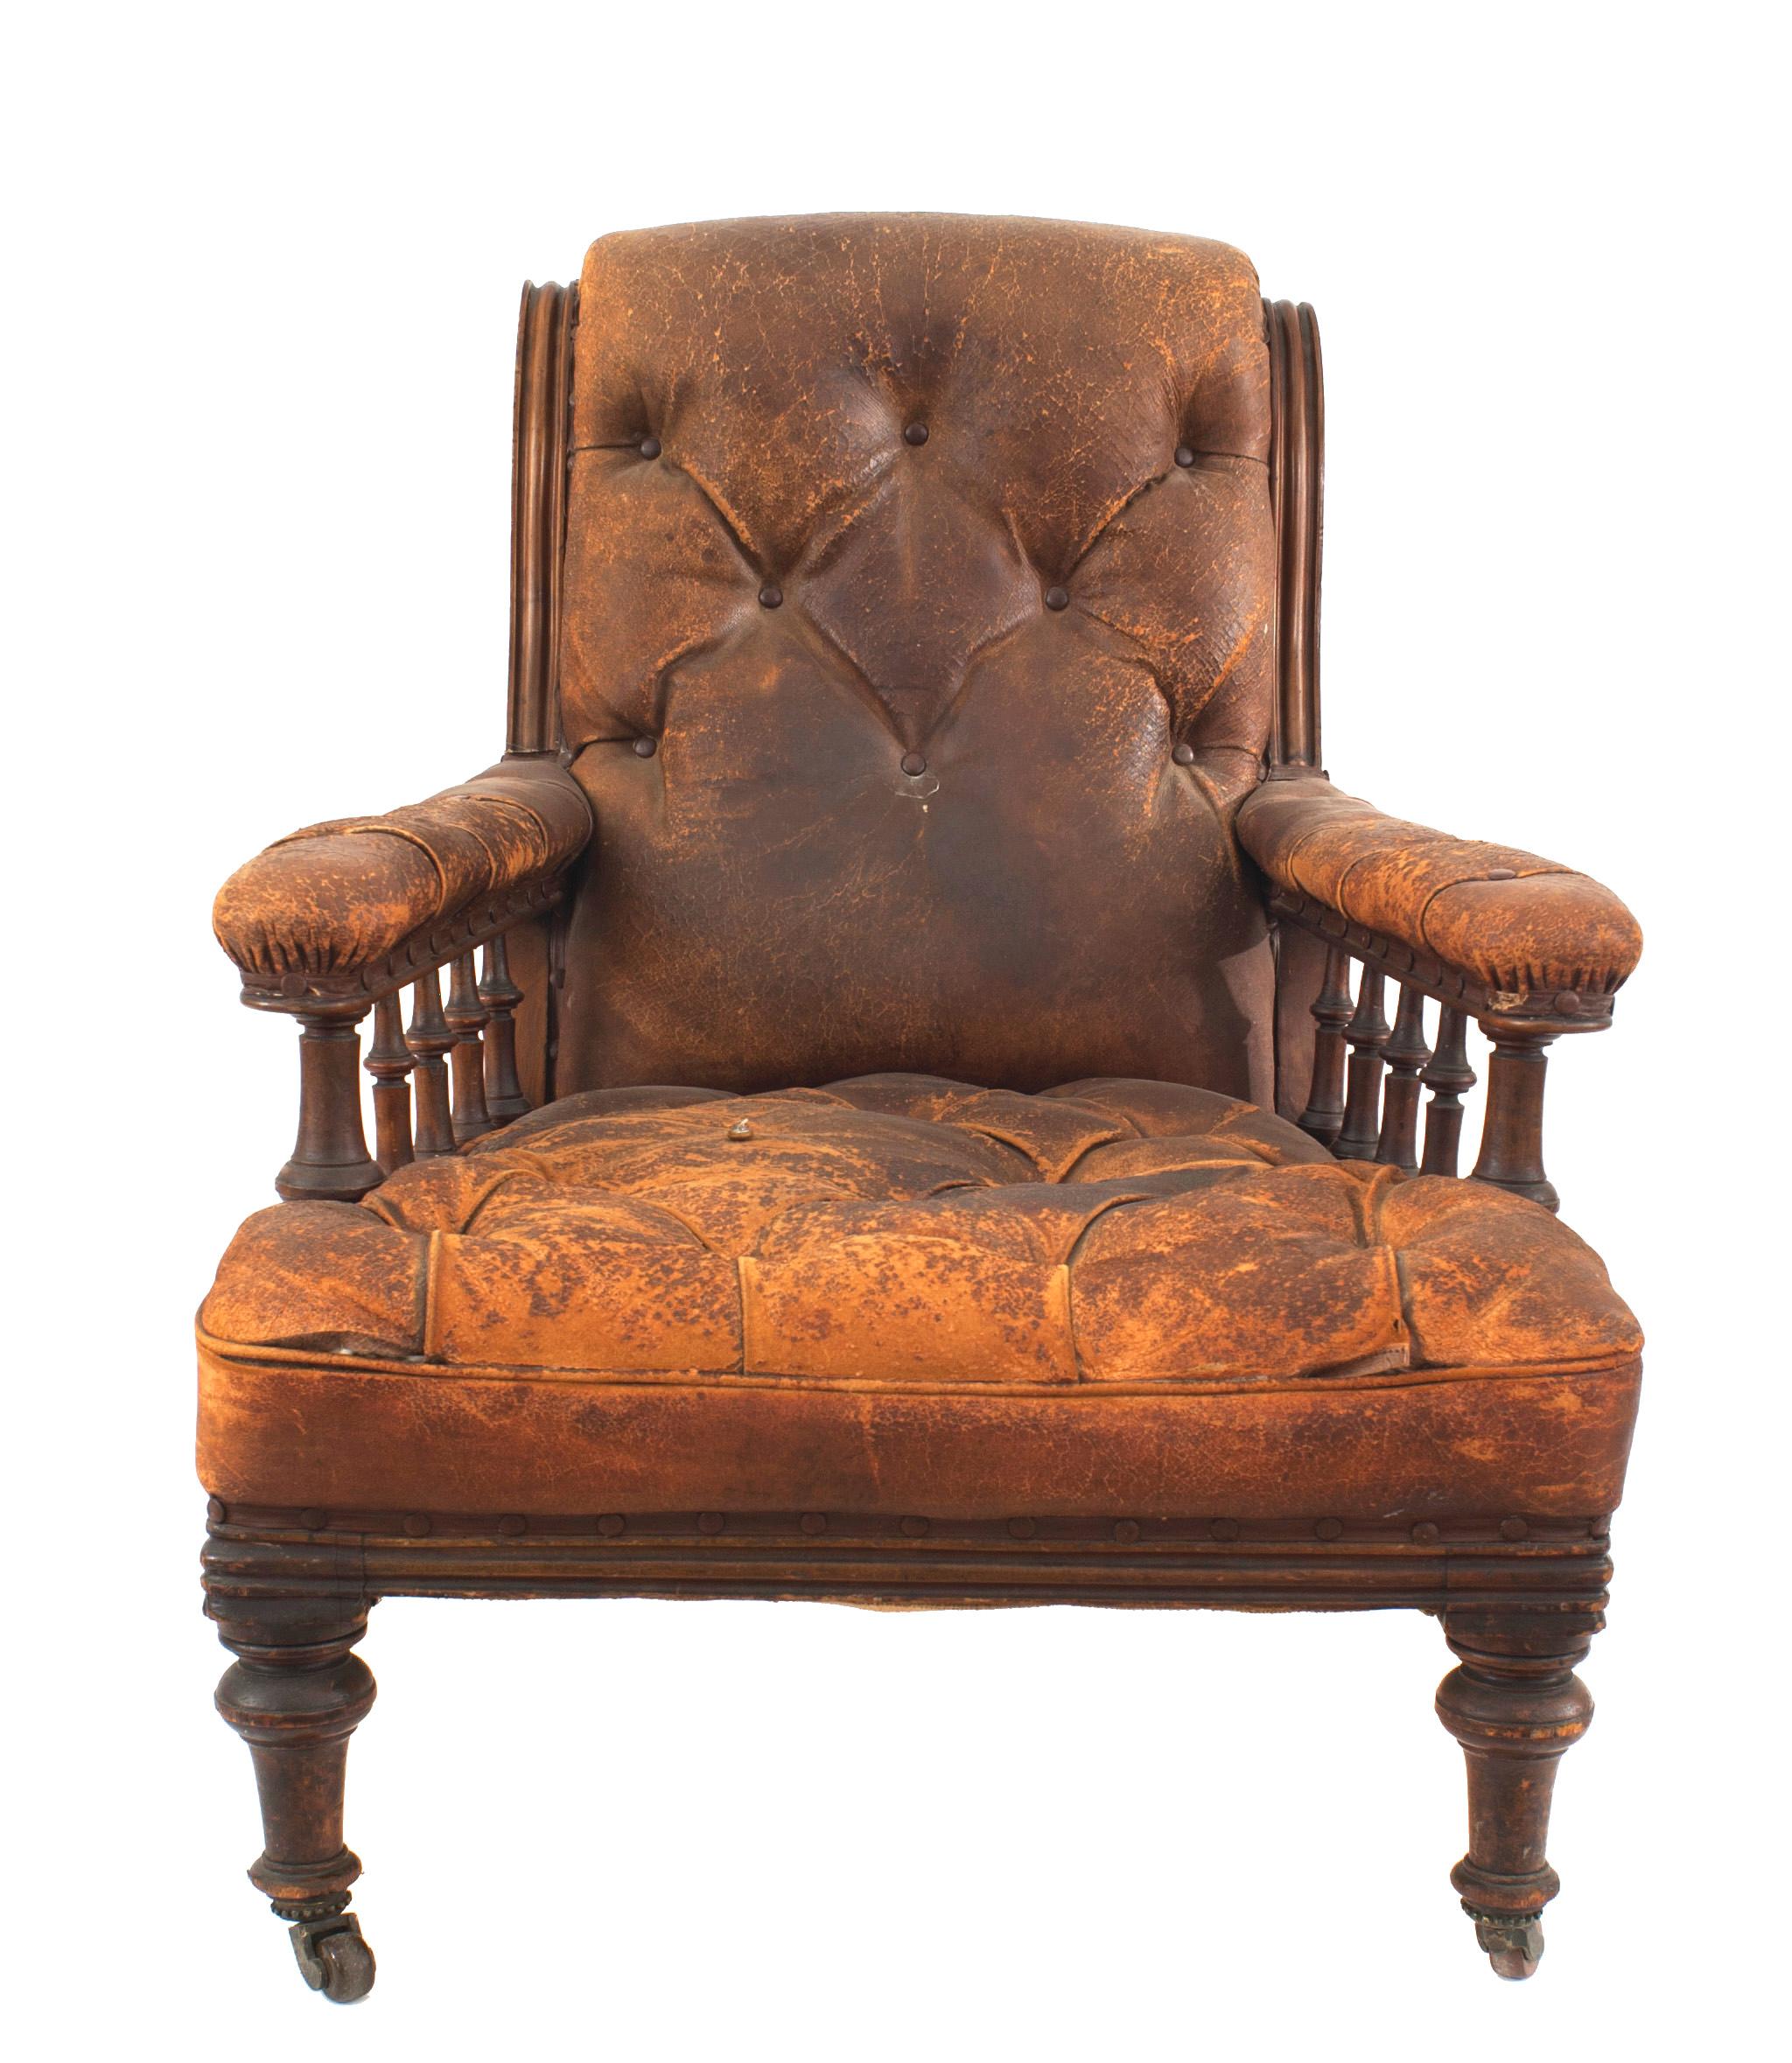 English Regency mahogany armchair with a sleigh back and spool design under both arms upholstered in a worn red tufted leather.
 